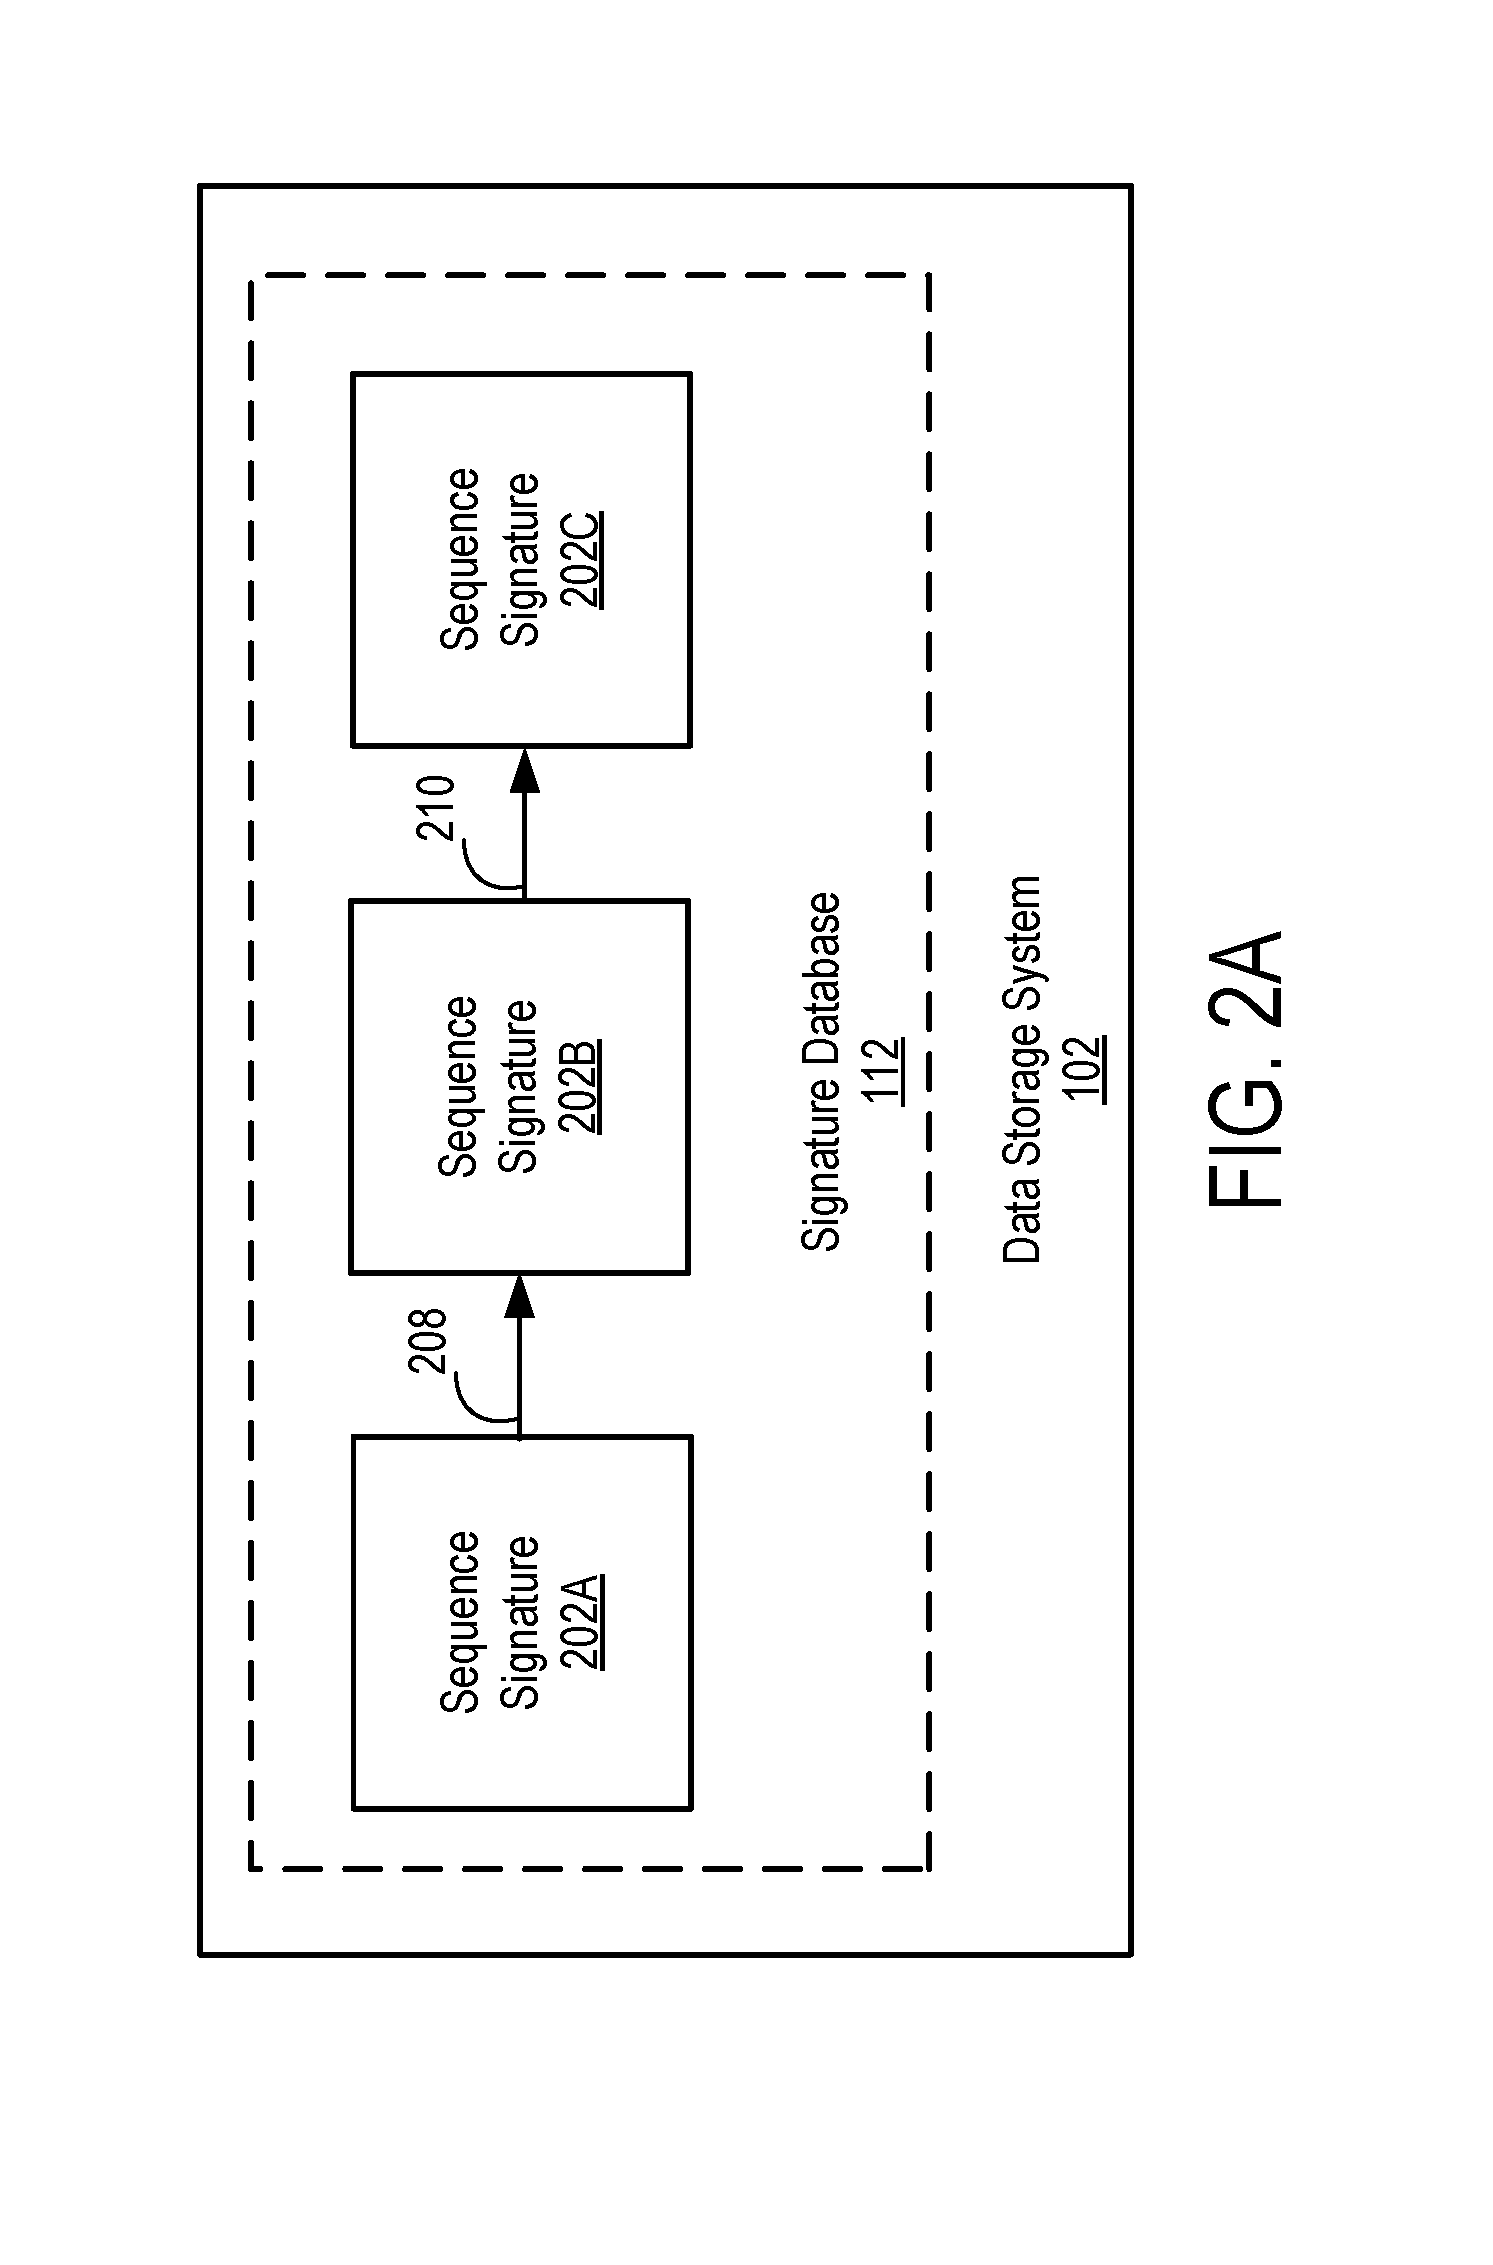 Making cryptographic claims about stored data using an anchoring system